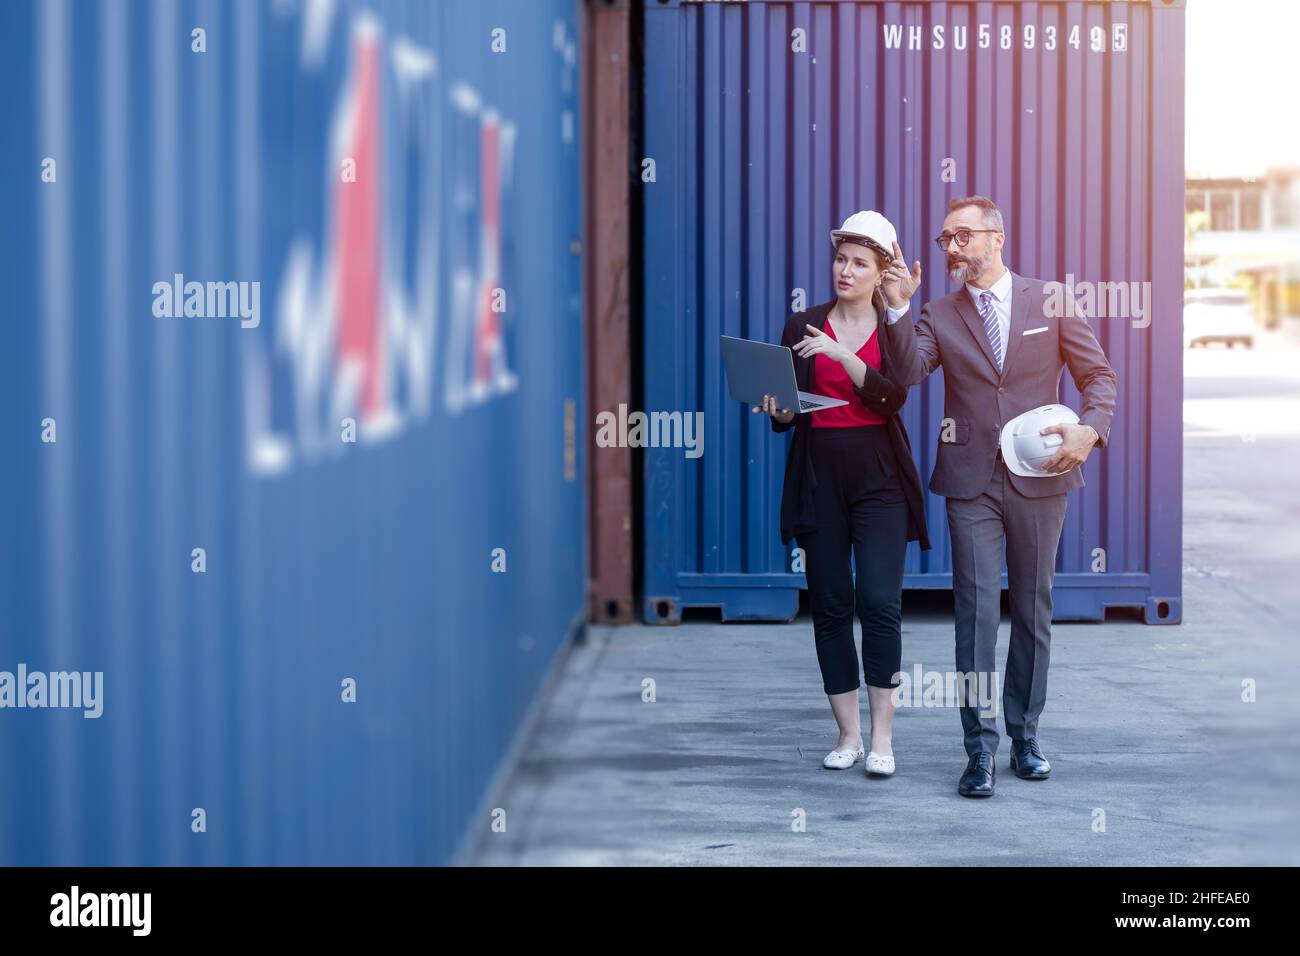 Business man working with women team or secretary in port cargo logistics industry Stock Photo